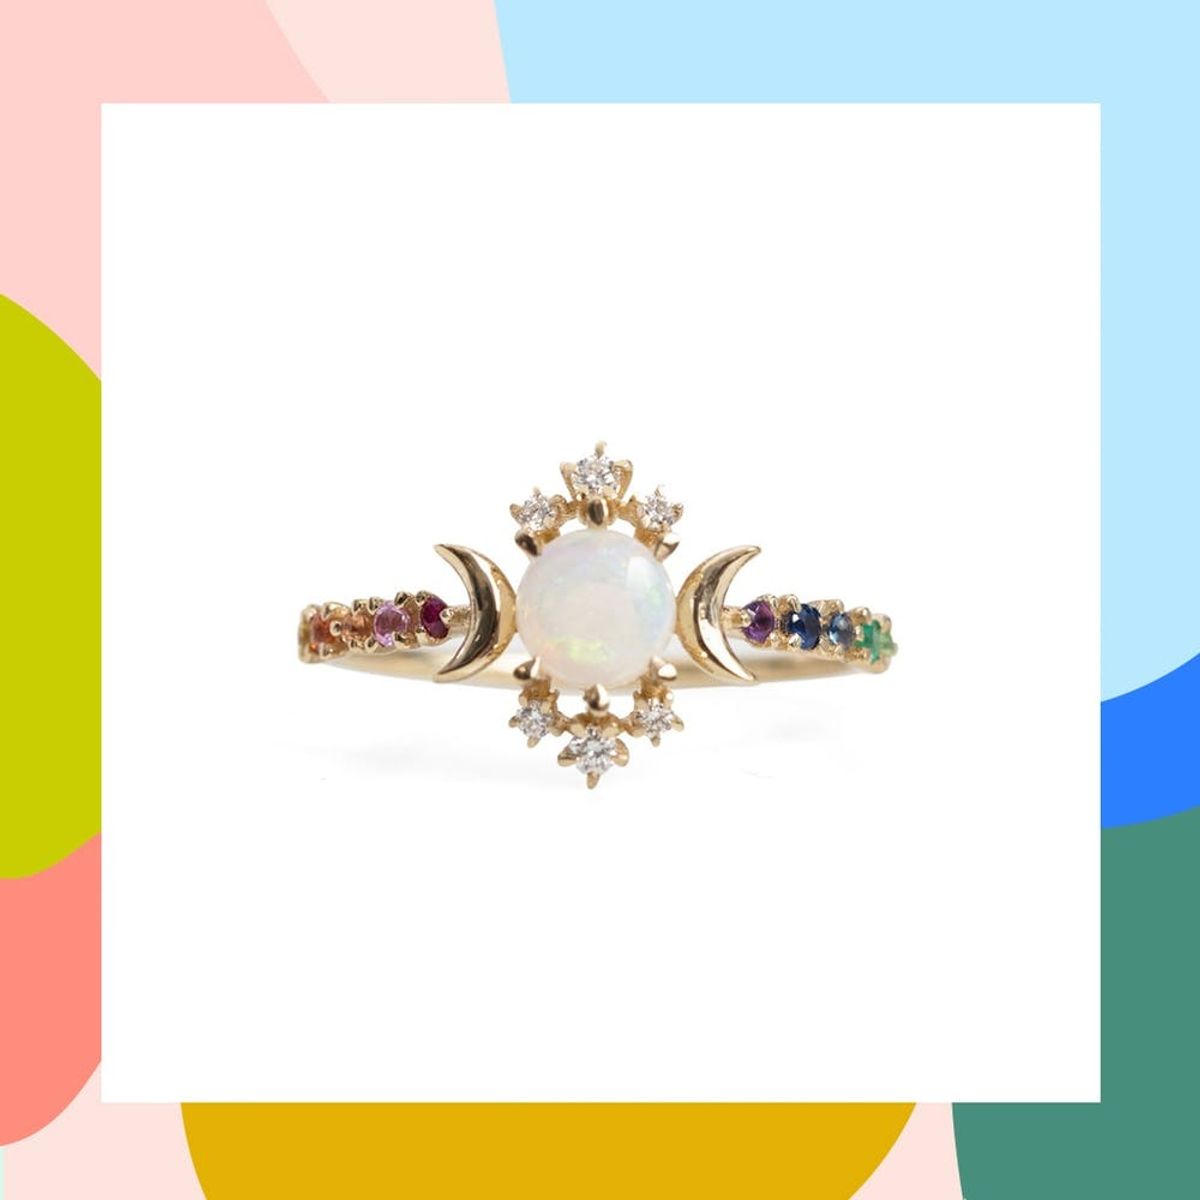 12 Opal Engagement Rings You’ll Fall in Love With